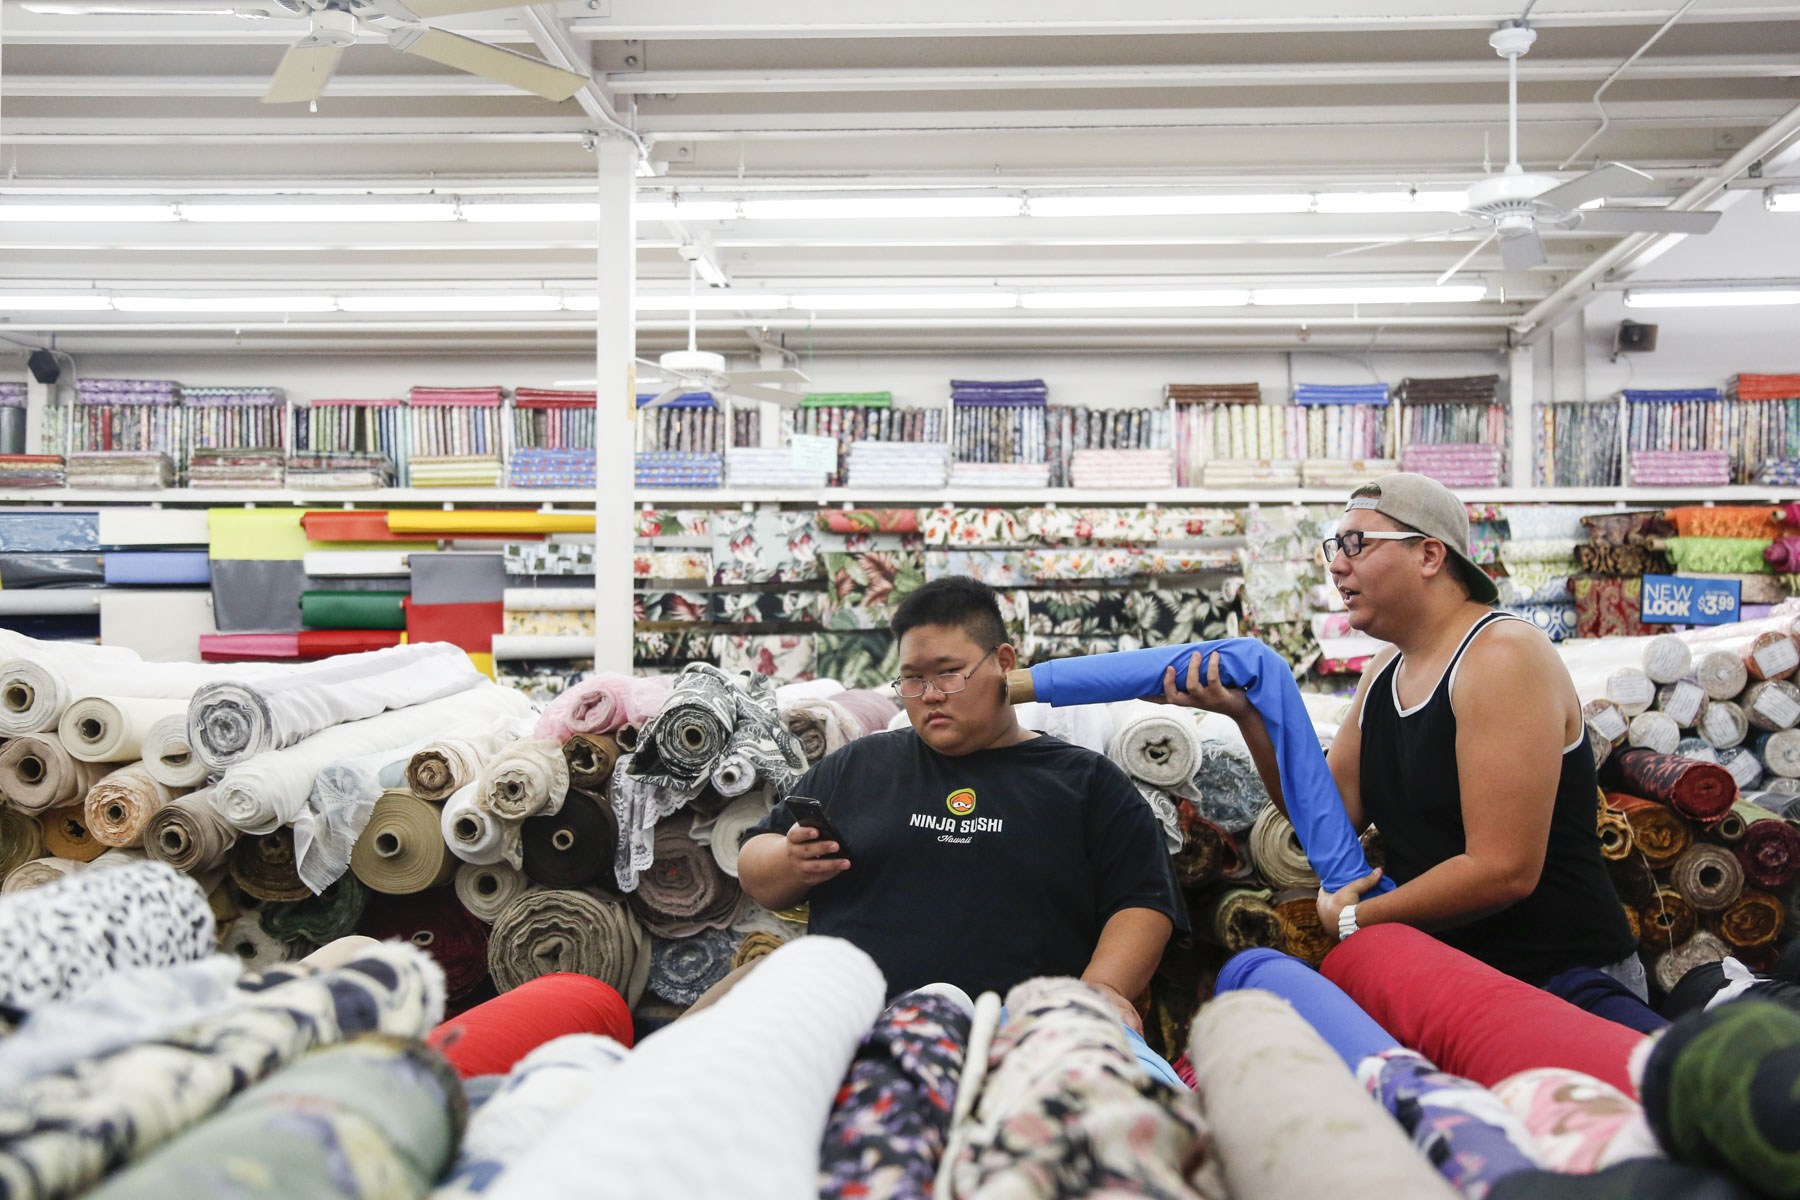  The Fruity Queens shop for fabric together at Fabric Mart in Aiea, HI. Water Melone (left), otherwise known as Keone Oka, hasn't fully come out to her family yet and keeps all of her drag attire/accessories at Apple Aday's, otherwise known as Tim Ke